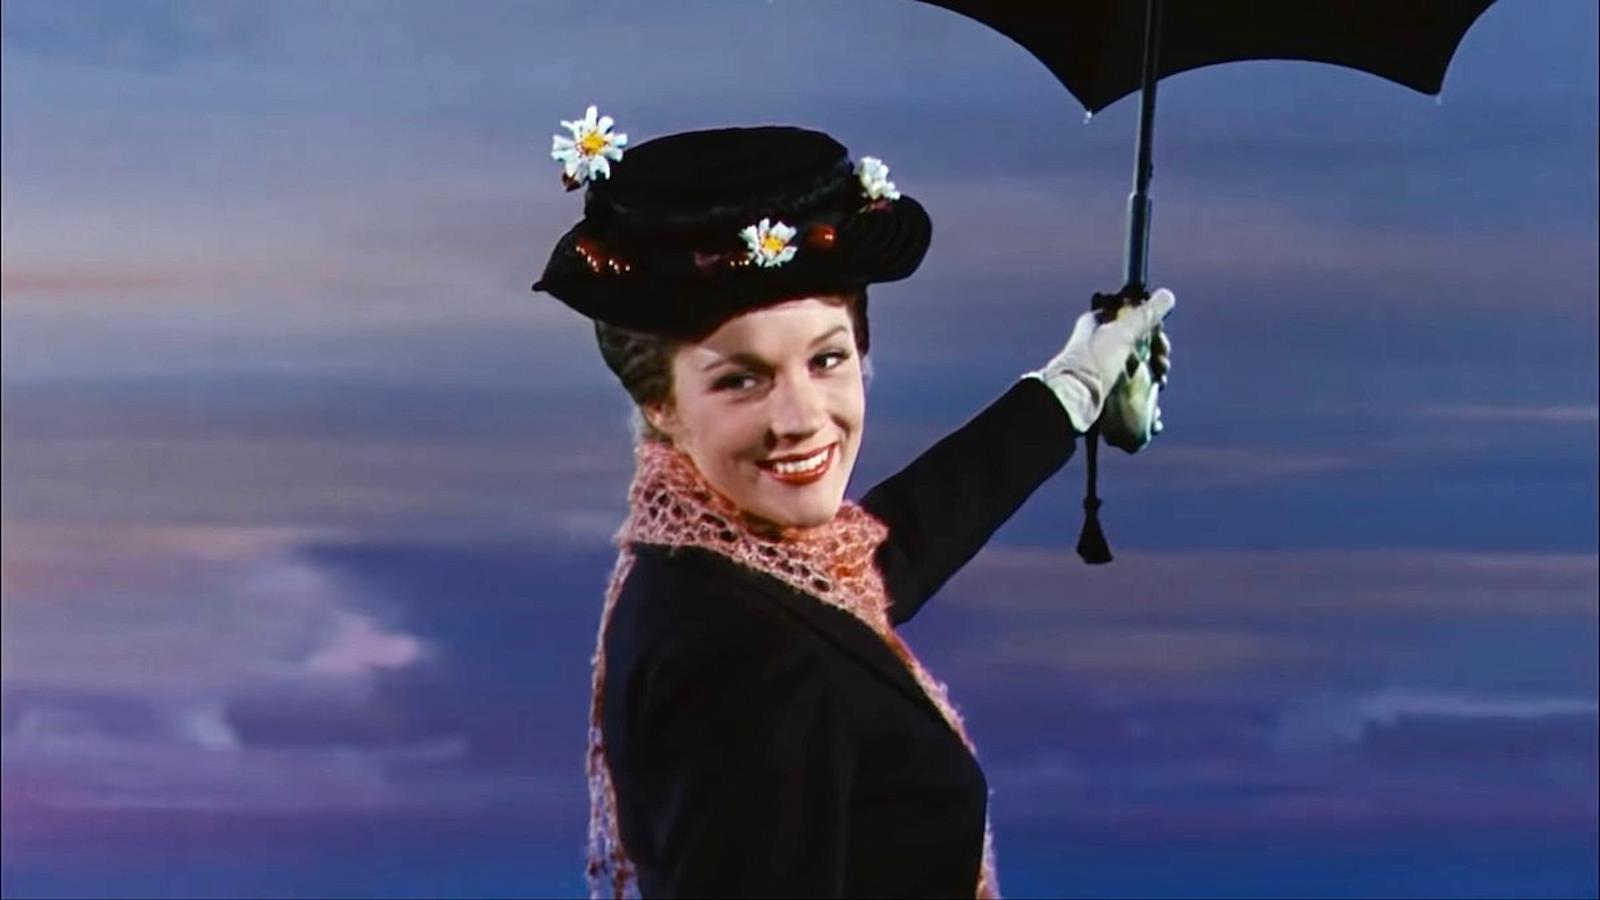 Mary Poppins holding her umbrella and smiling